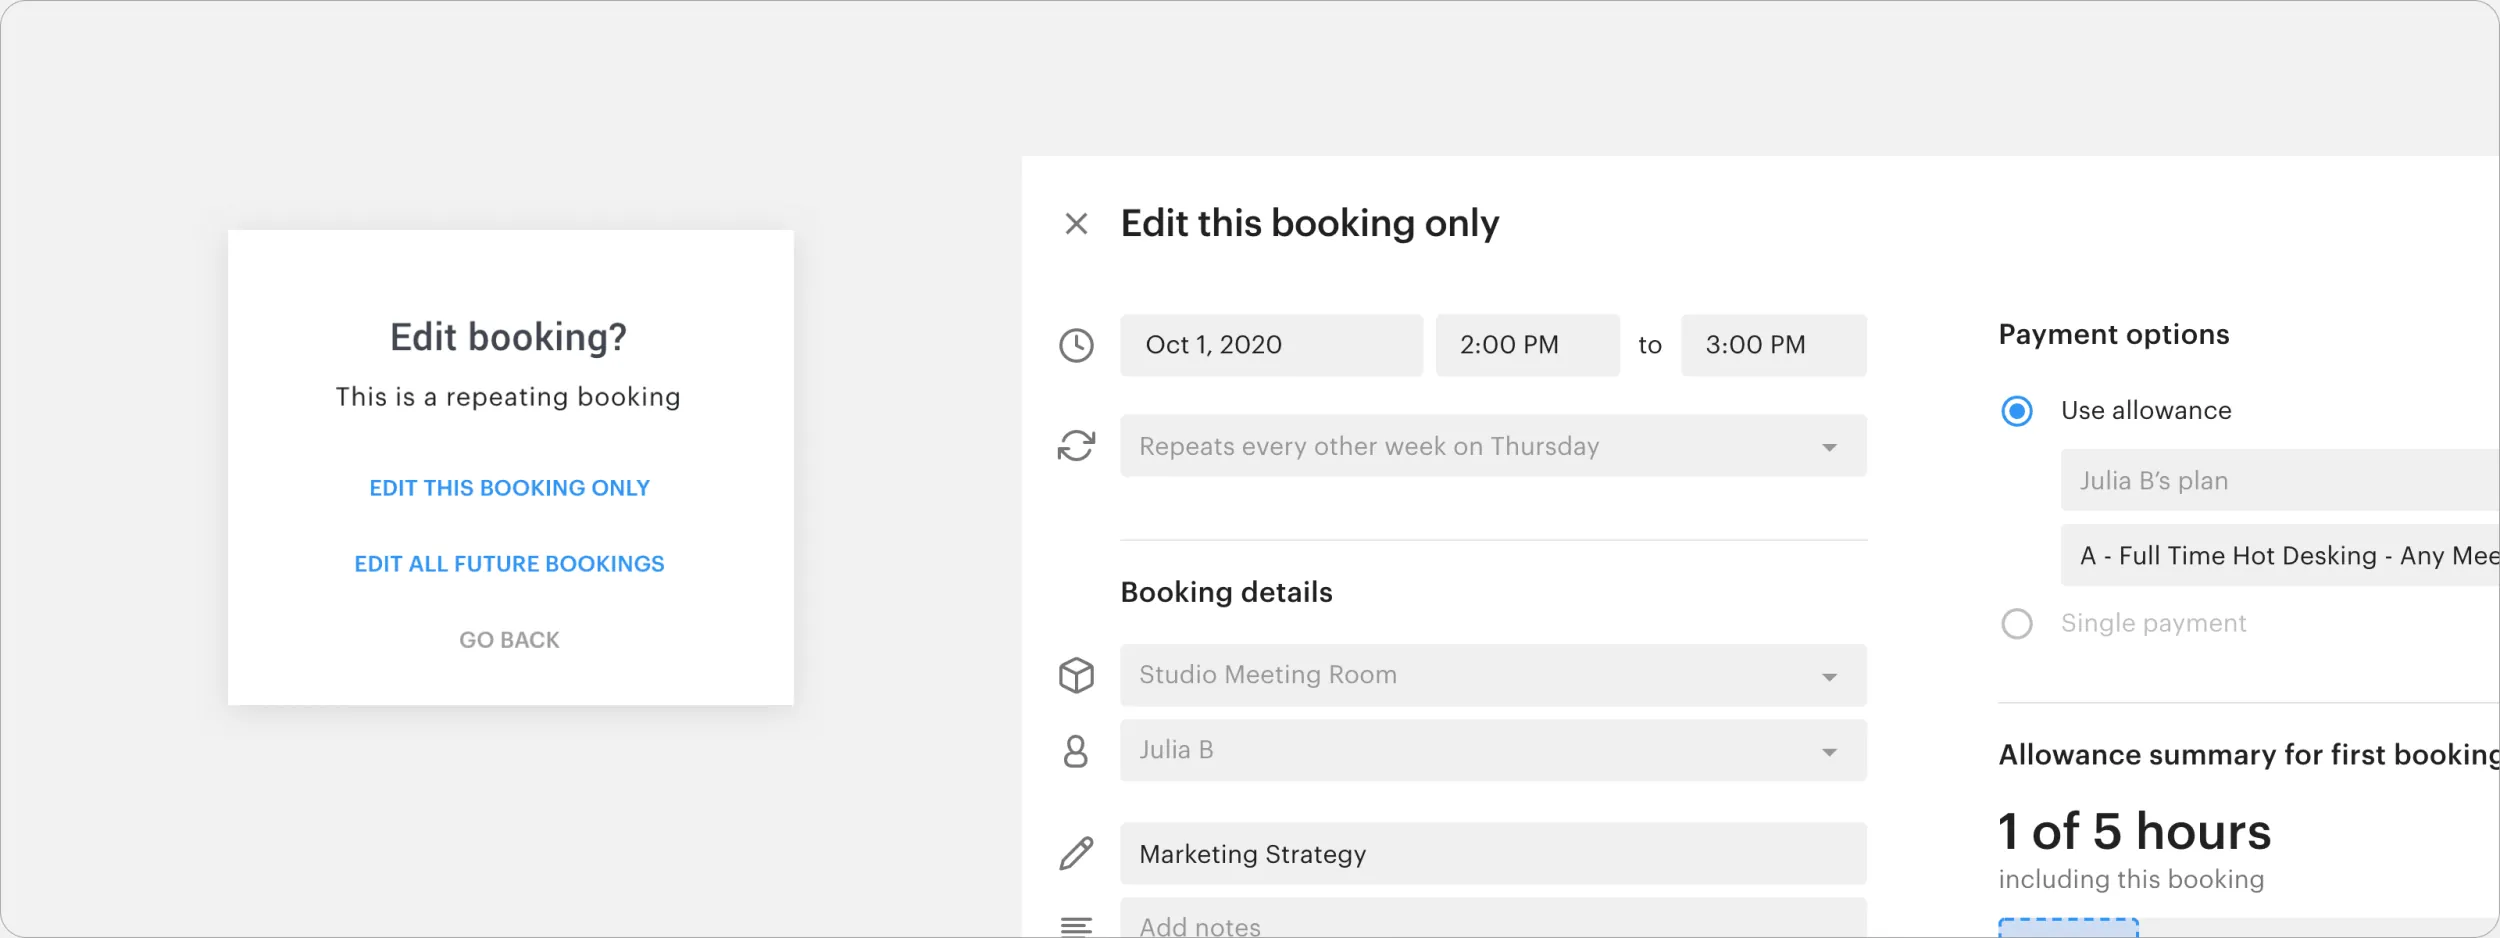 Repeat Bookings - Optix feature coworking software